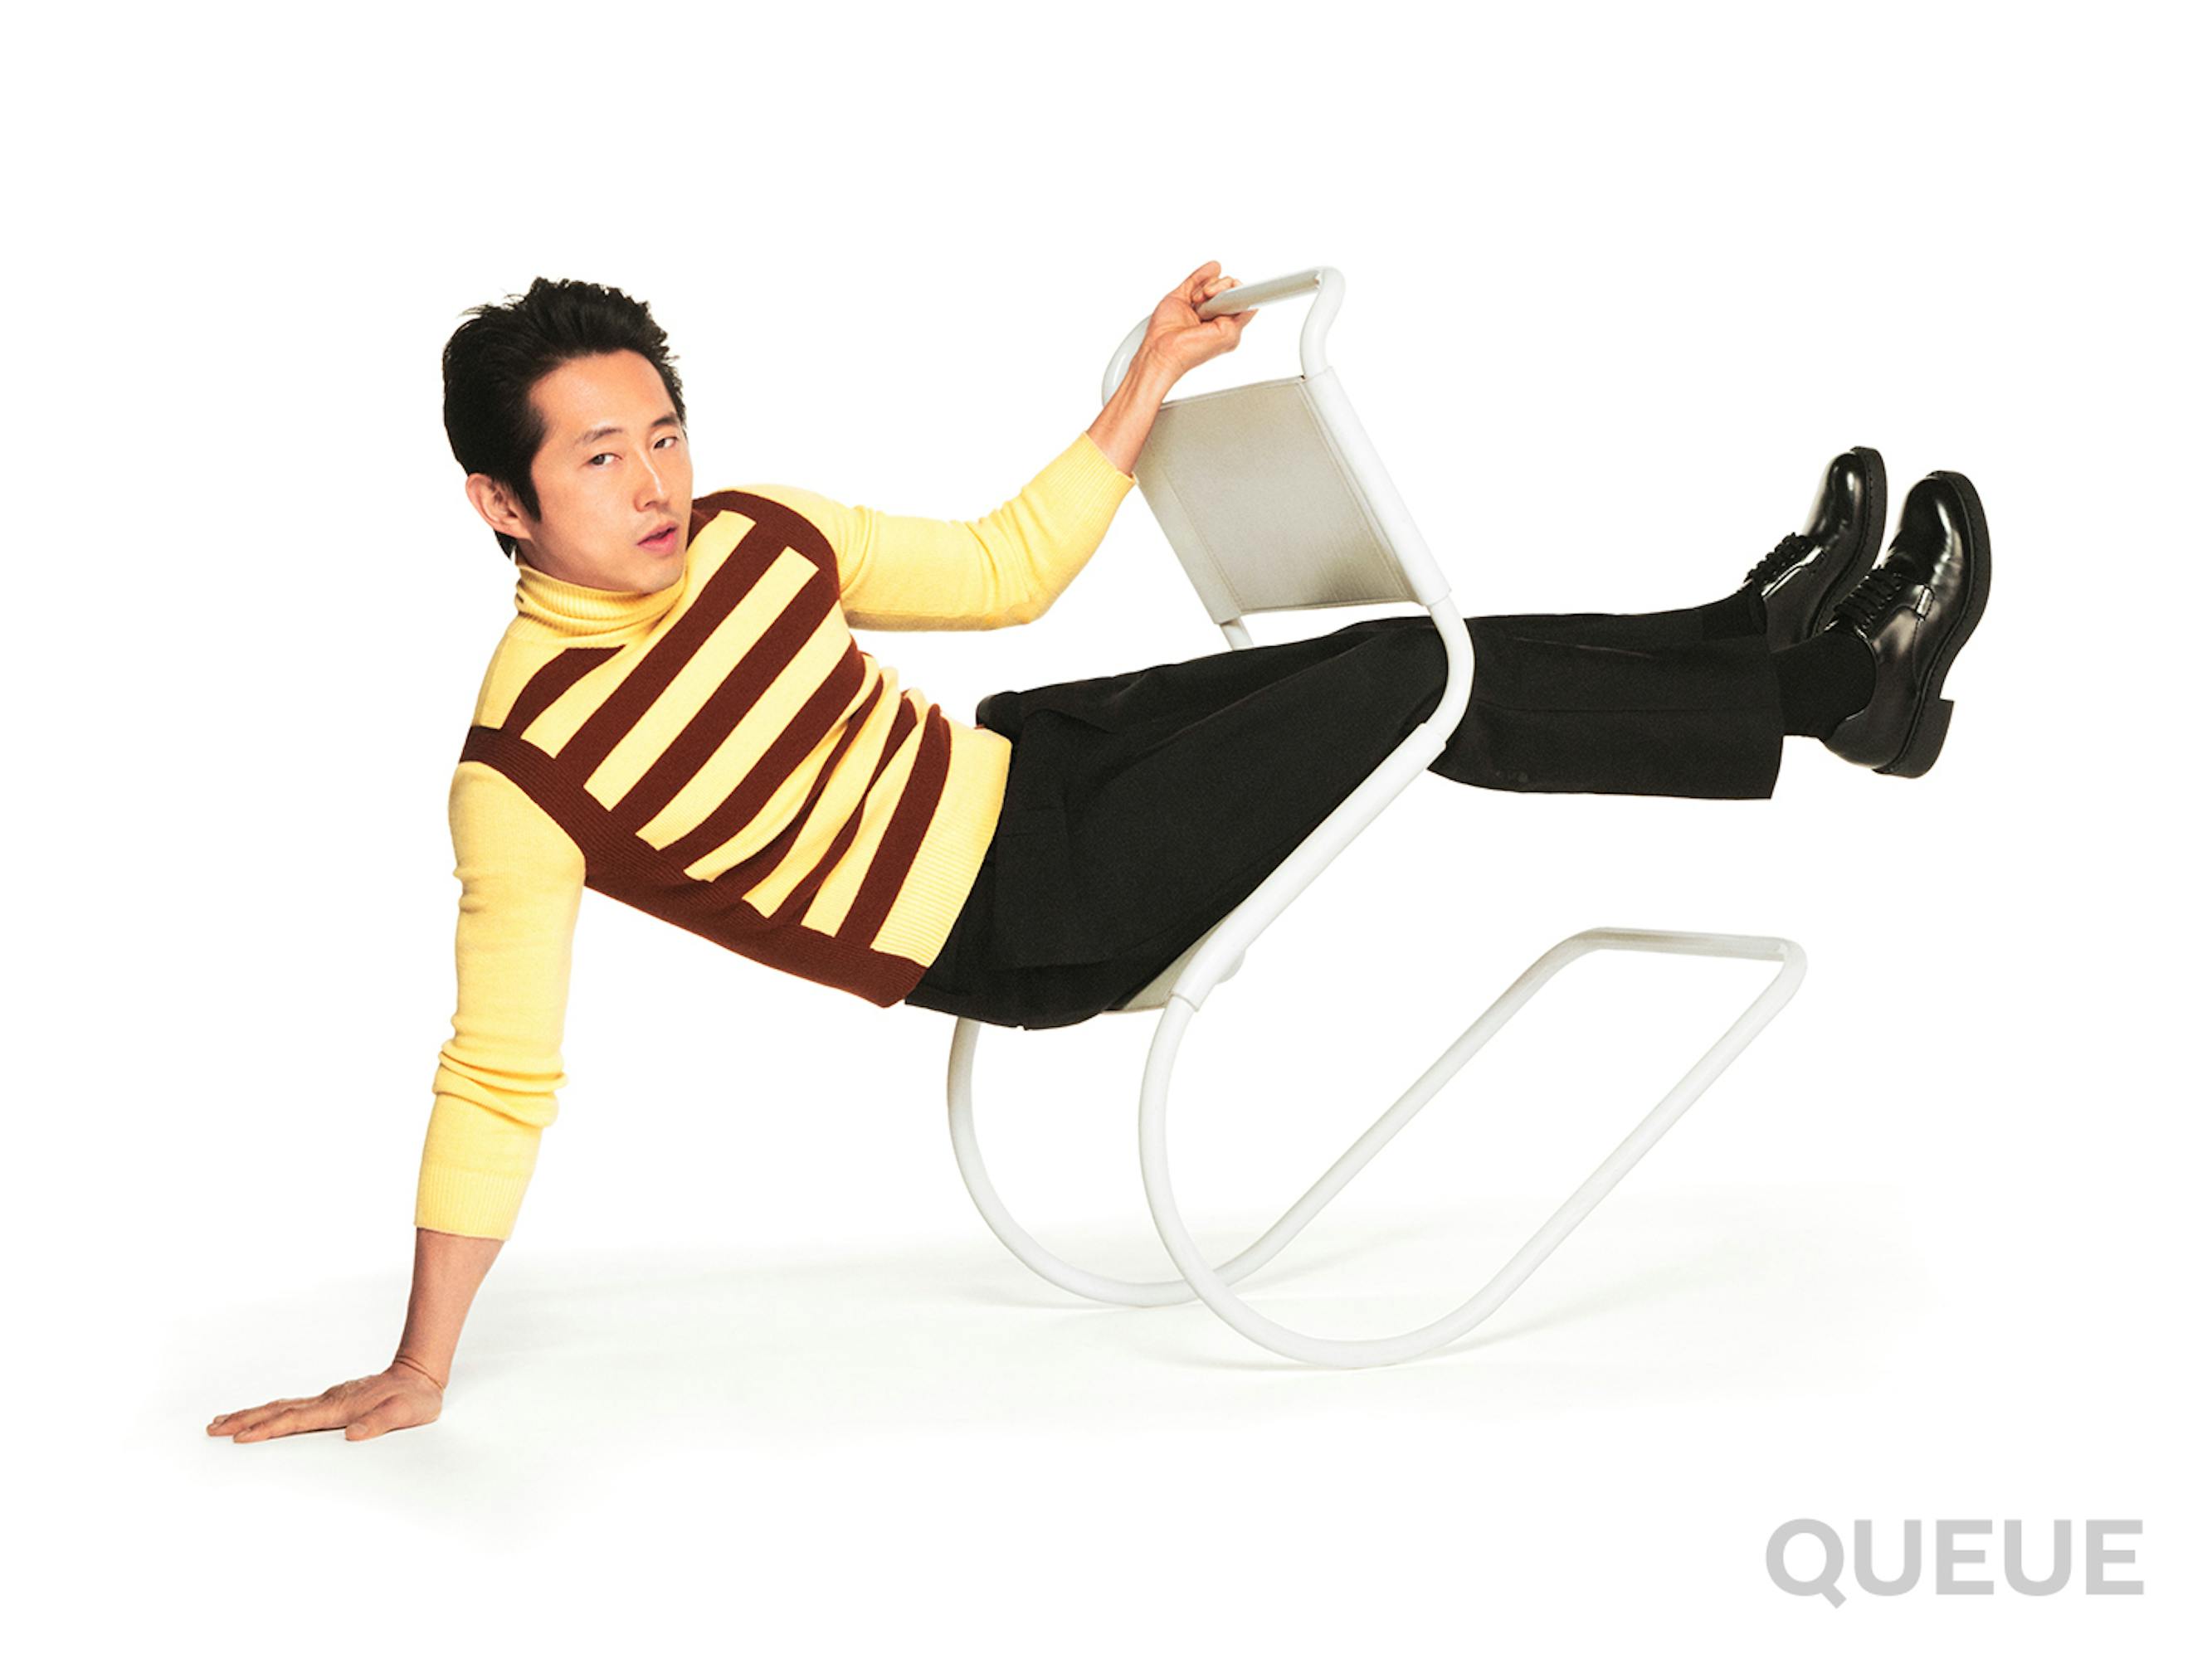 Steven Yeun leans back in a white chair. He wears a yellow and maroon striped shirt and black pants.